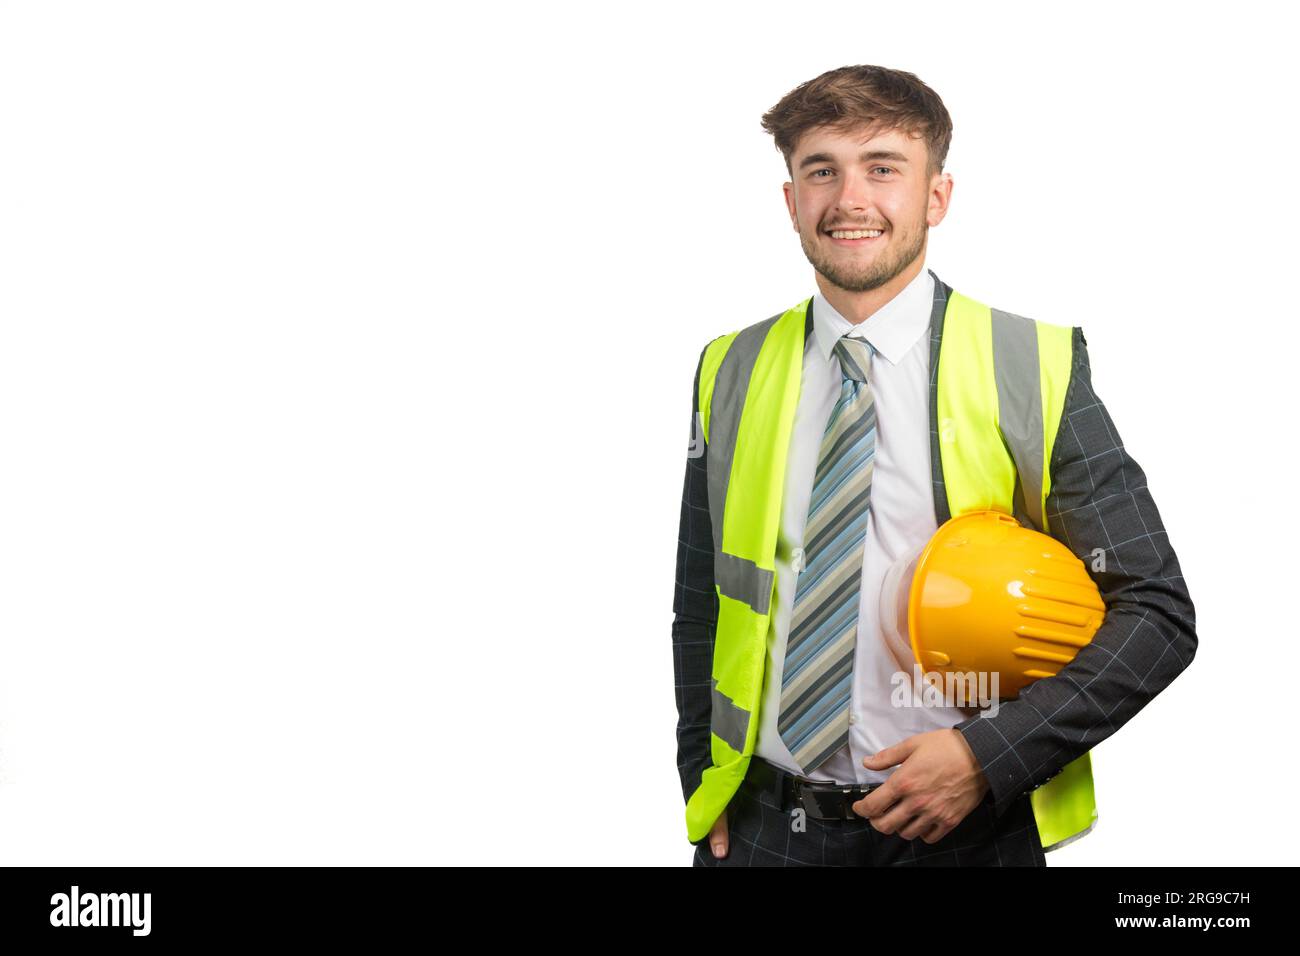 Man in high vis safety wear Cut Out Stock Images & Pictures - Alamy